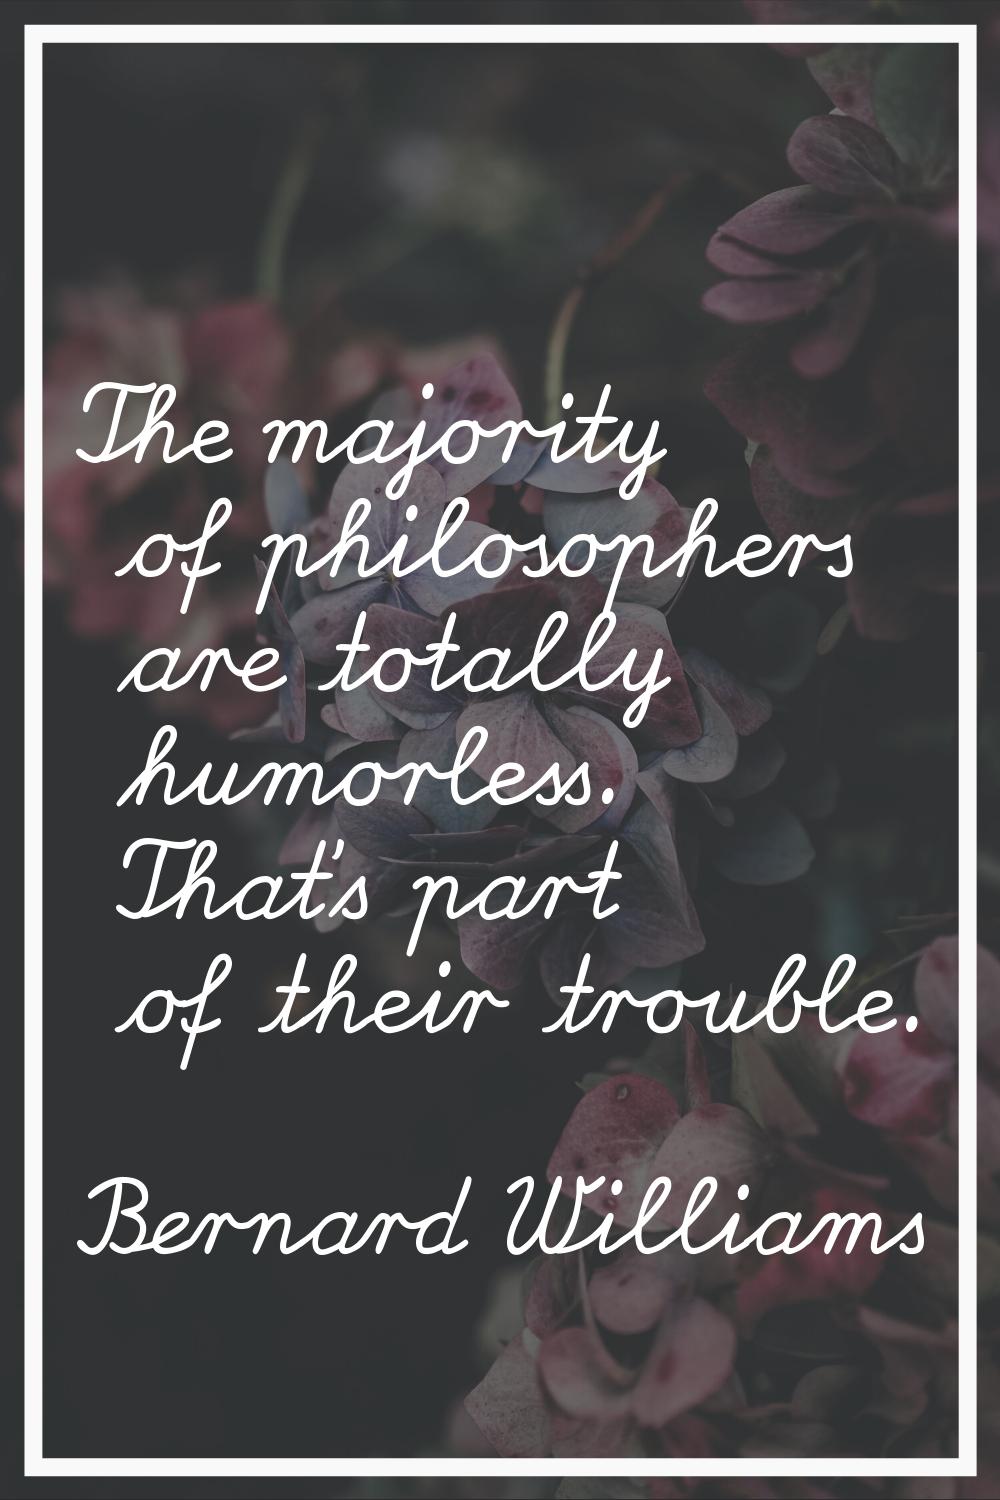 The majority of philosophers are totally humorless. That's part of their trouble.